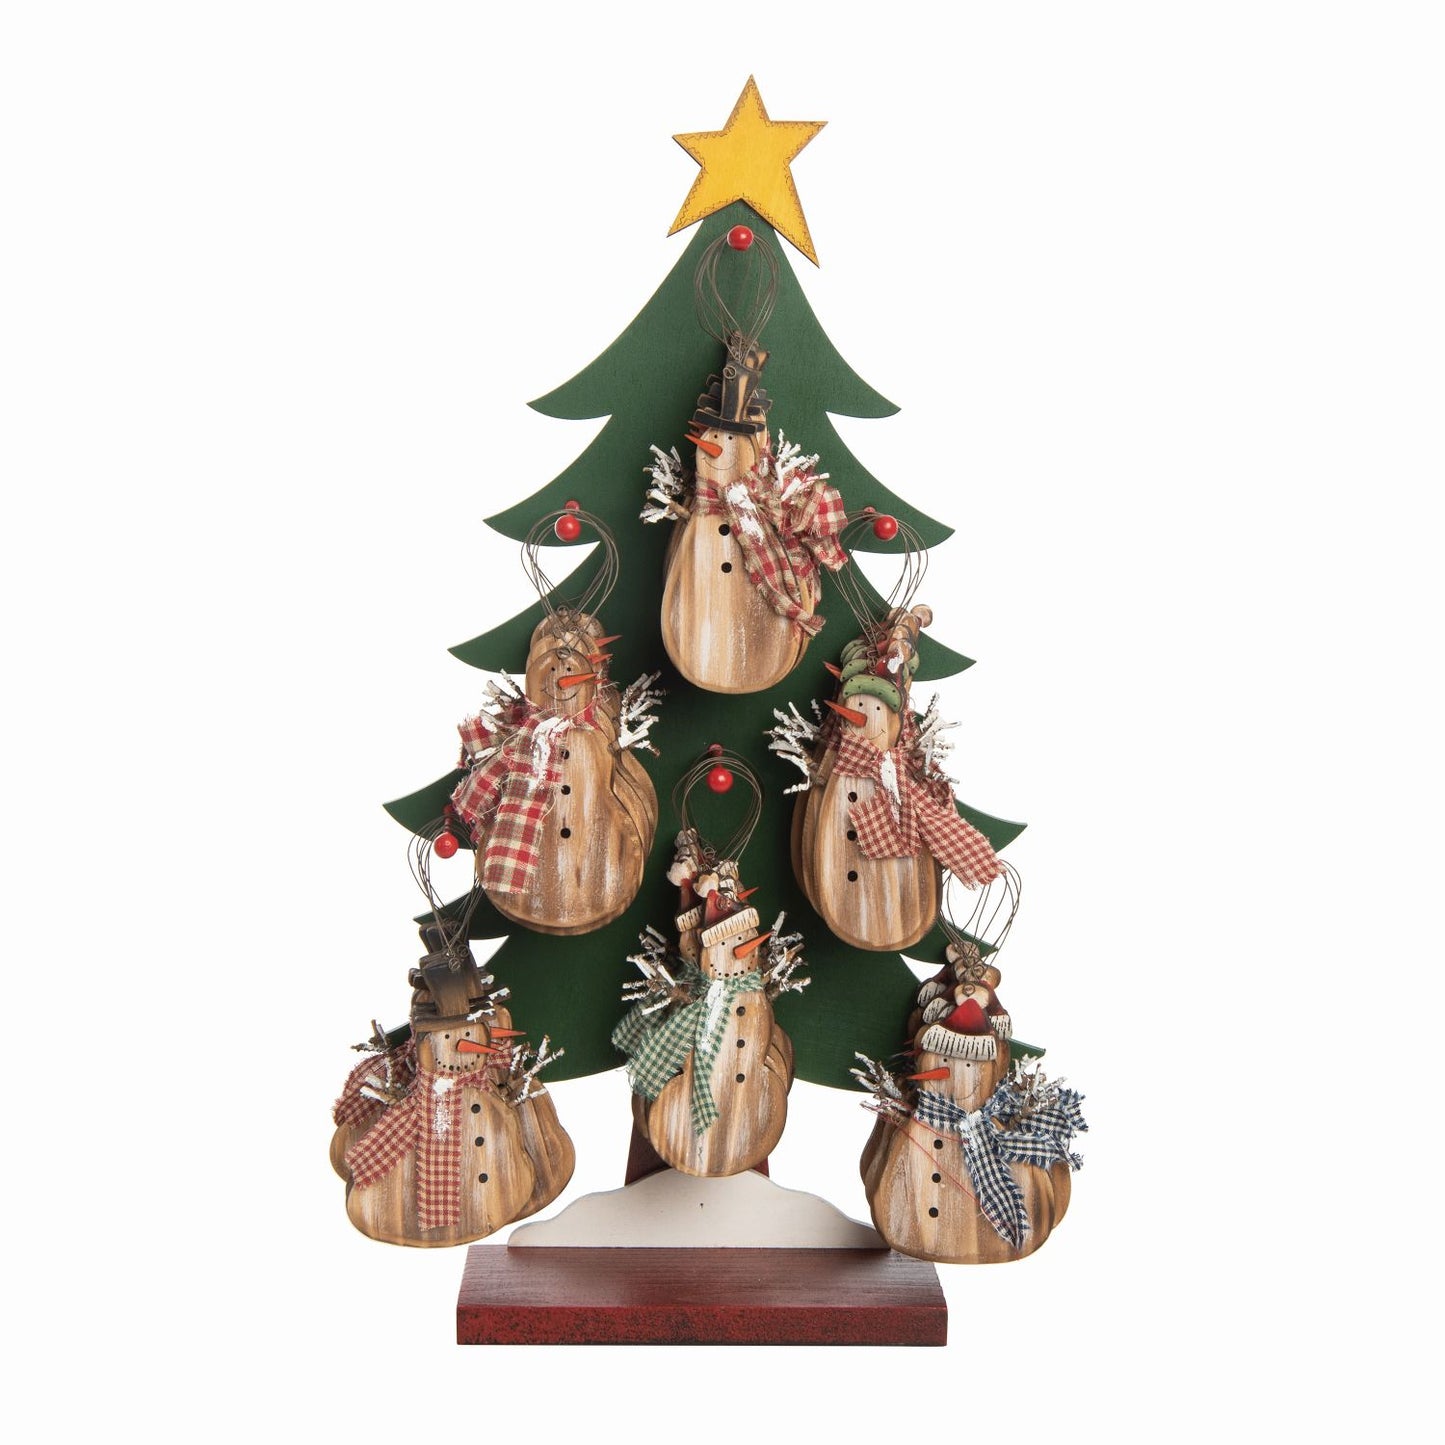 Transpac Plywood Rustic Snowman W/ Scarf Ornaments With Tree Display, Set Of 36